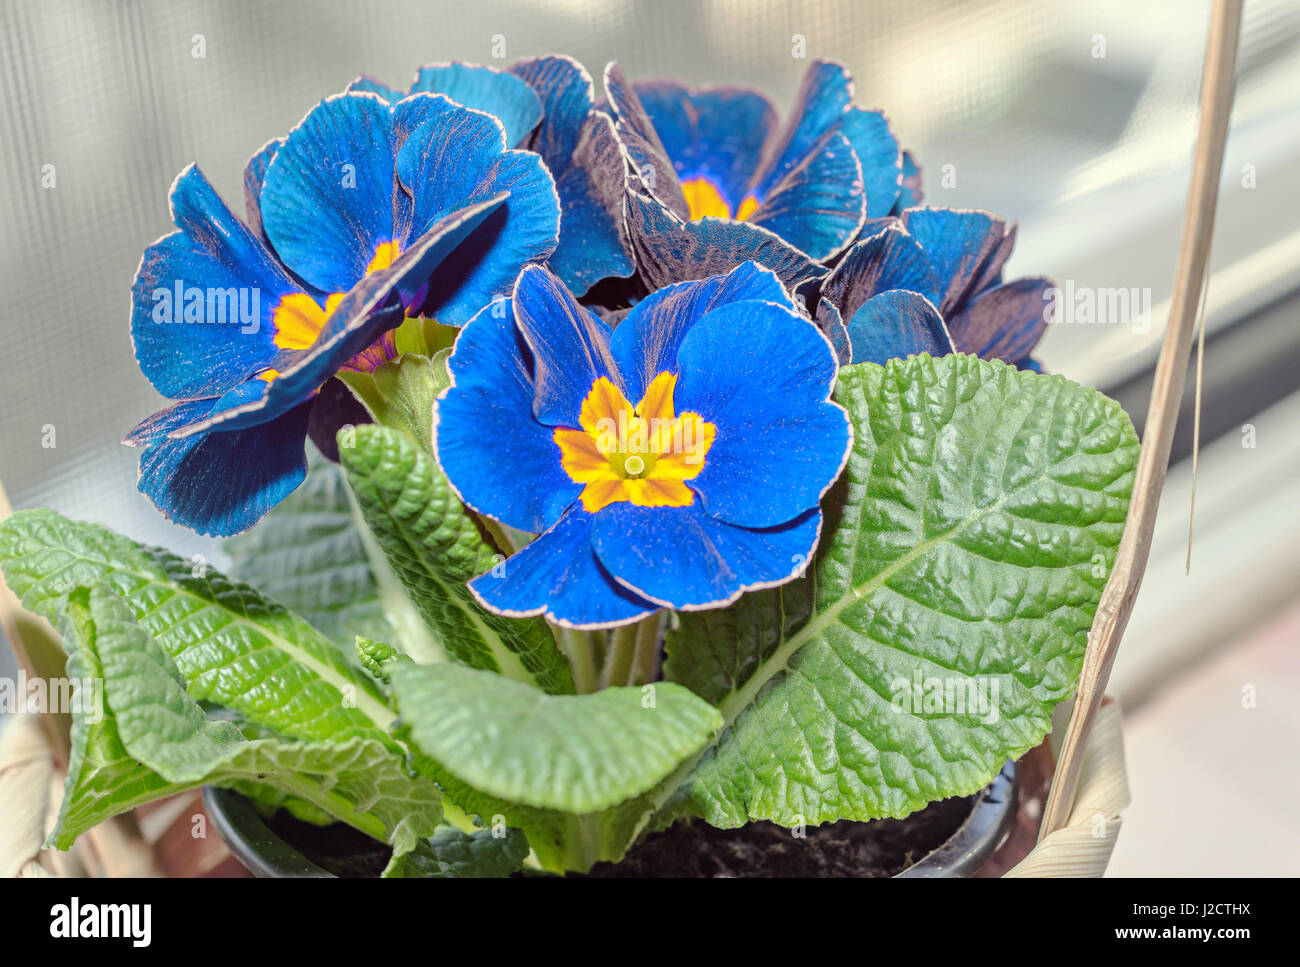 Primula obconica touch me, blue with yellow flowers, green leaves, close up basket. Stock Photo